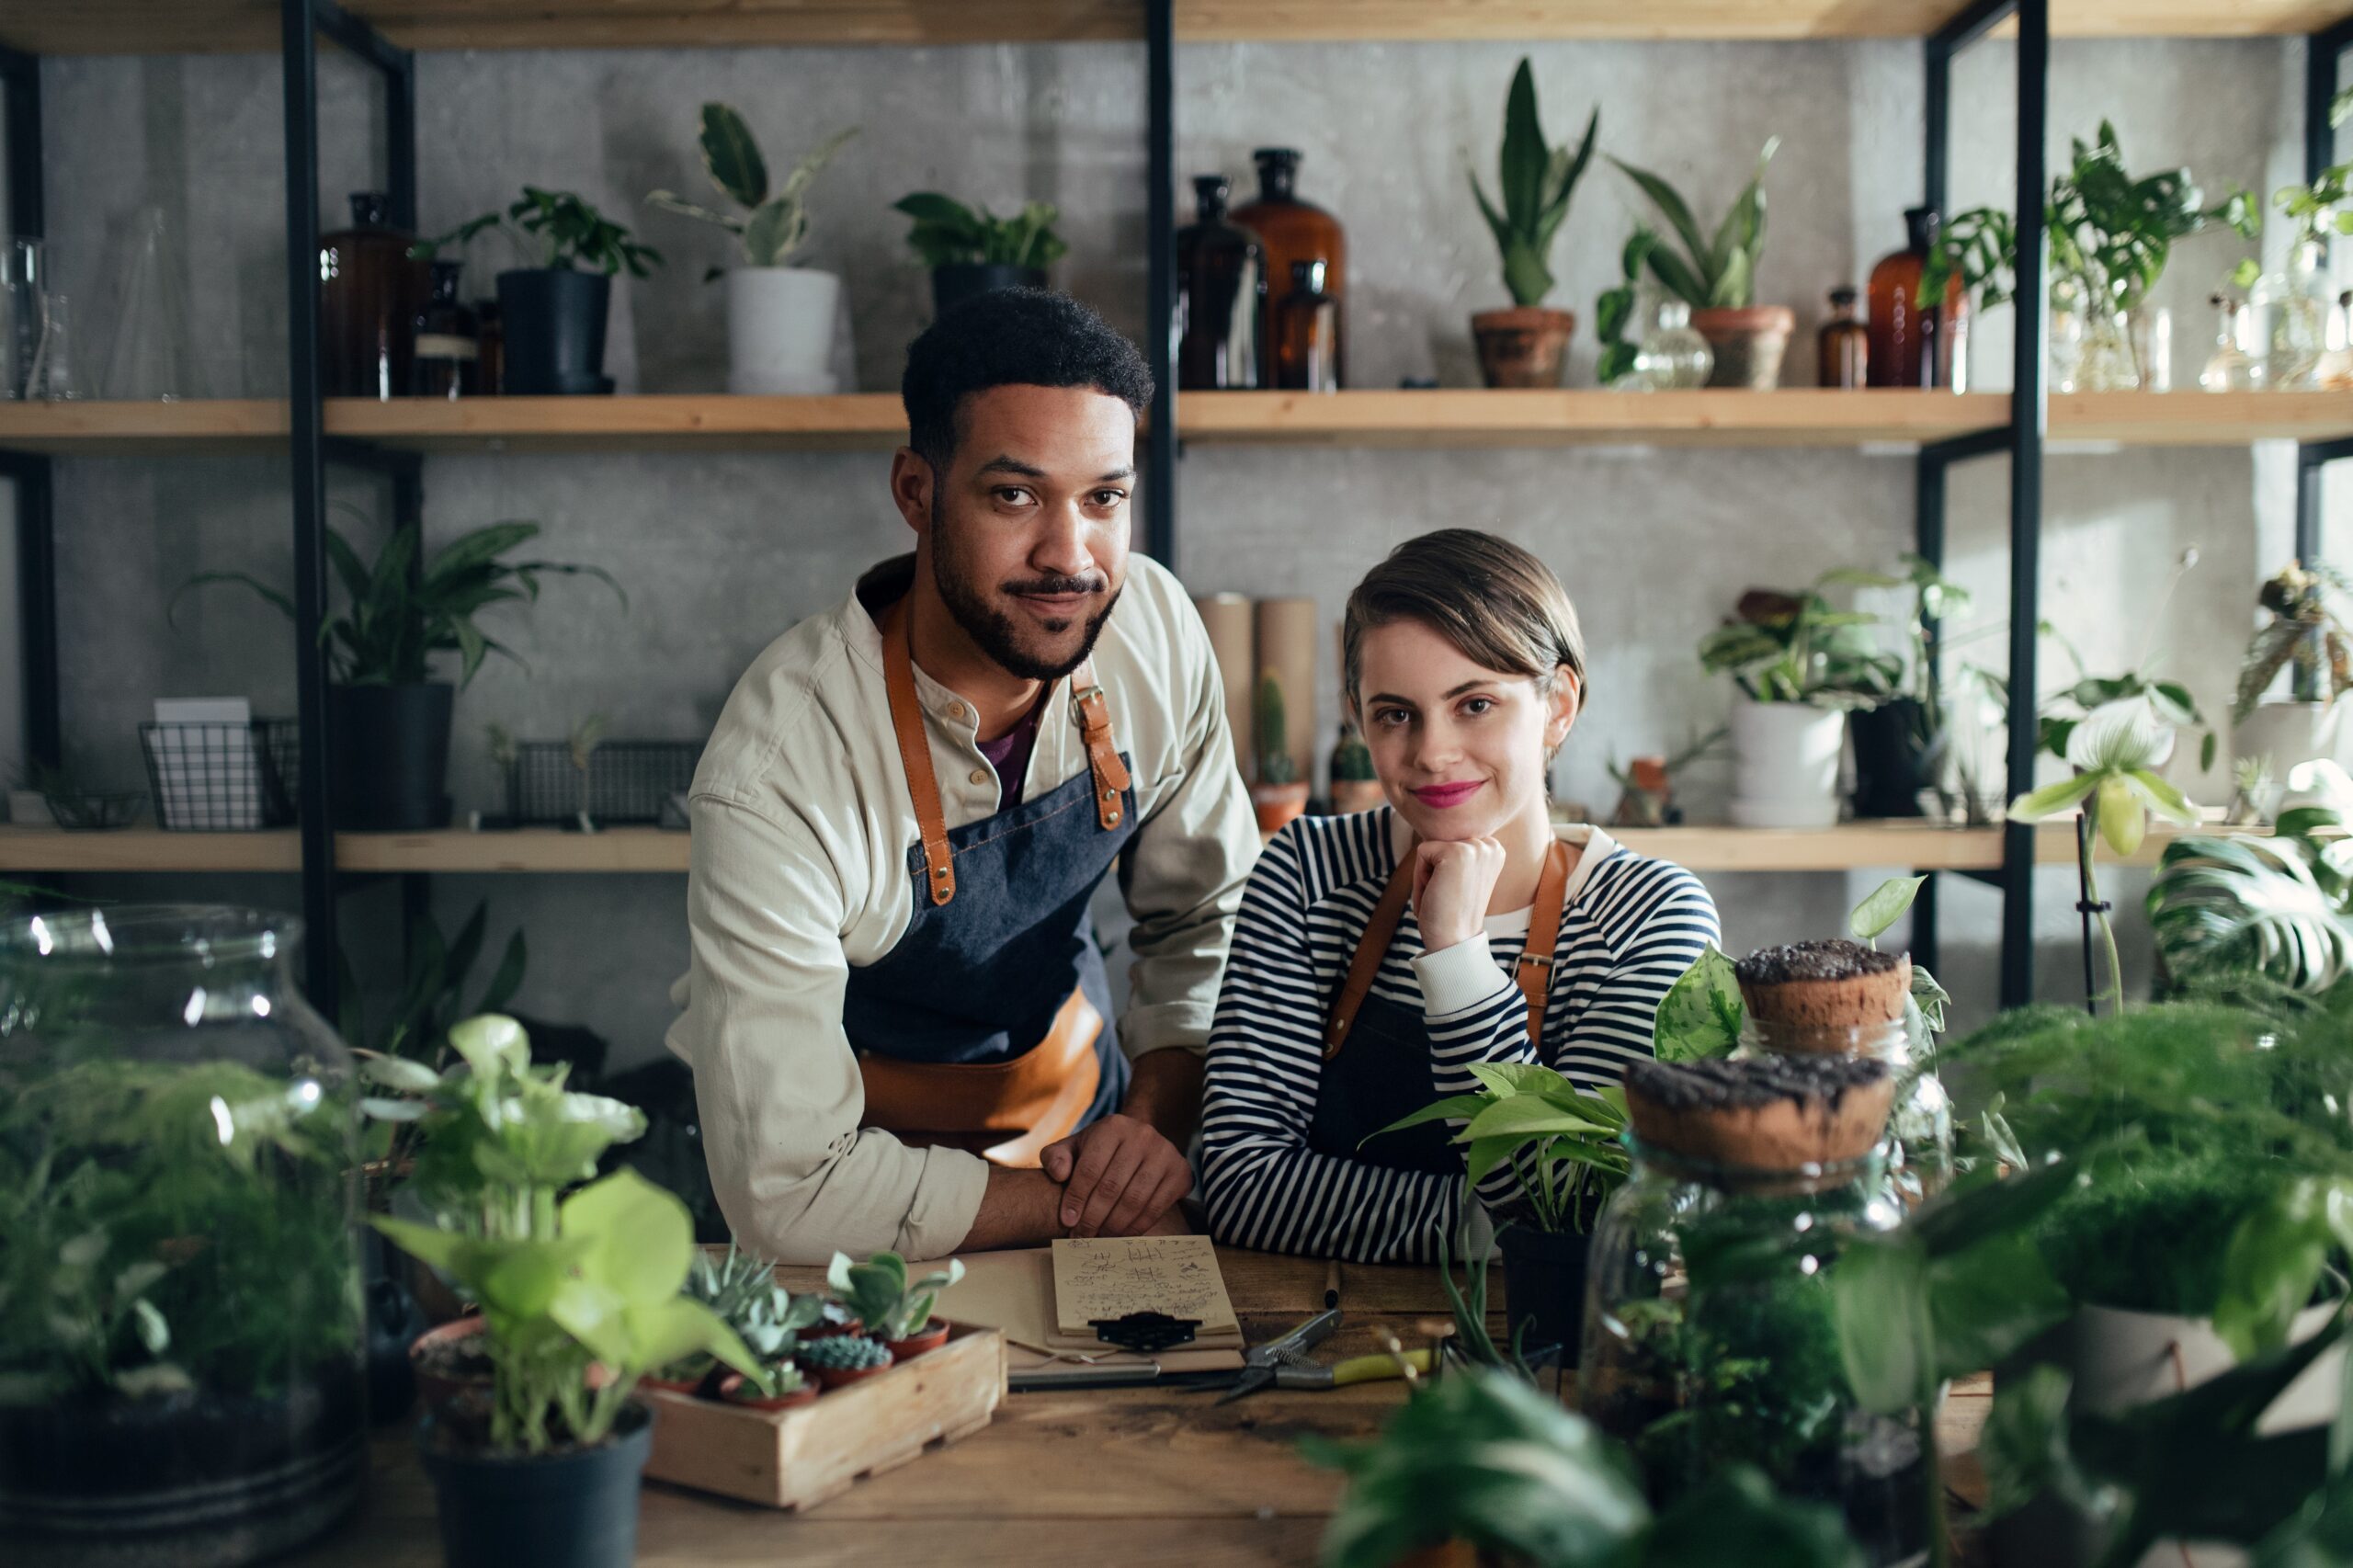 An image of a man and woman in aprons leaning on a counter with various plants and suculents around them.